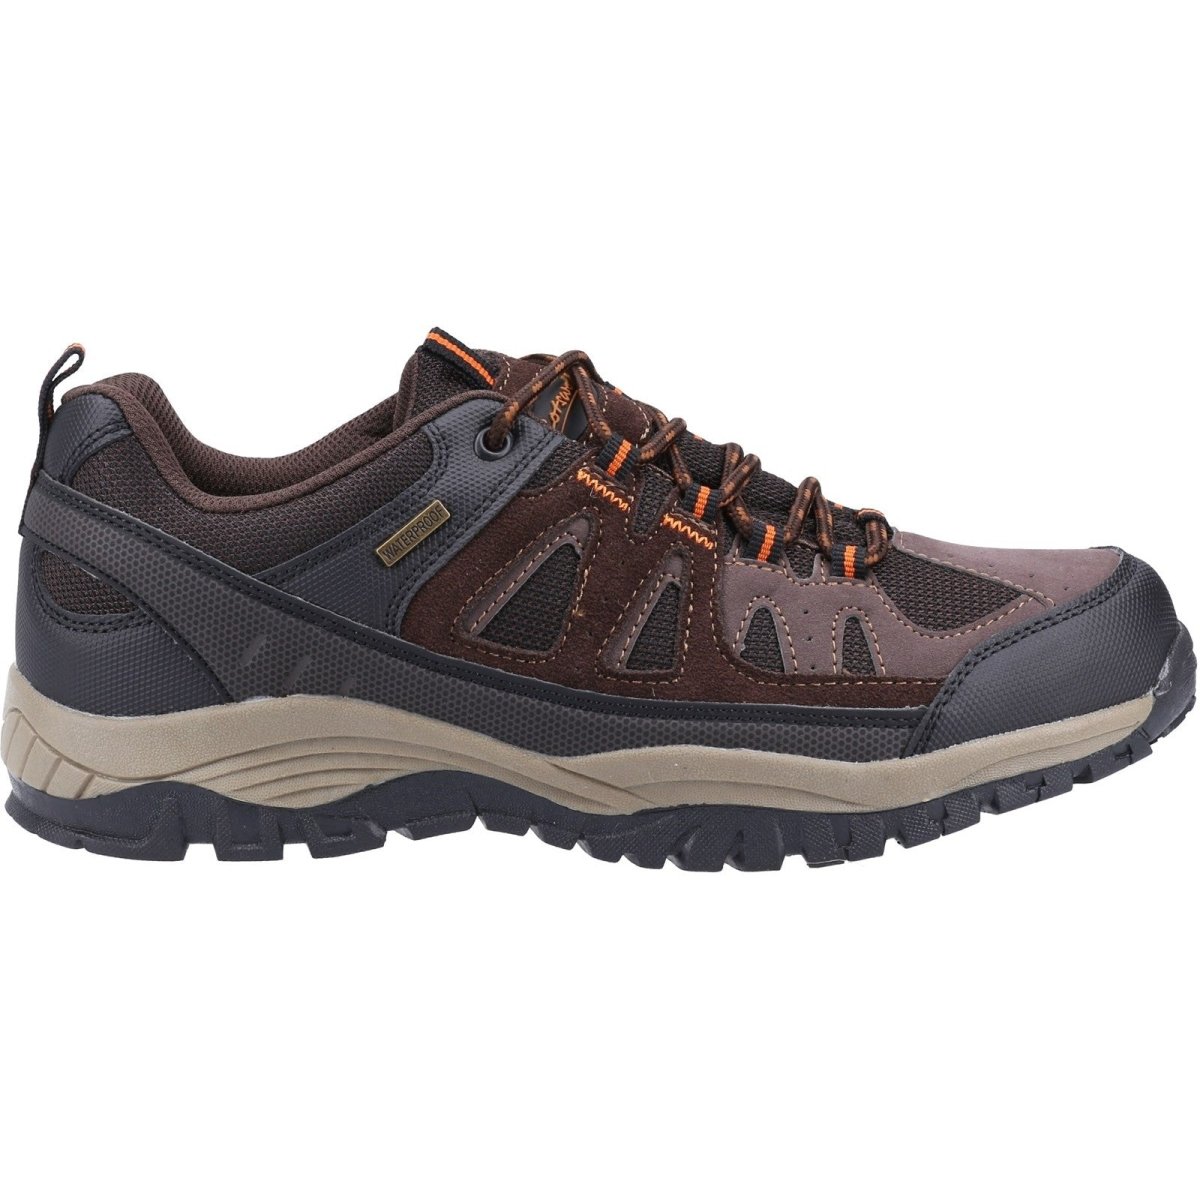 Cotswold Maisemore Low Mens Hiking Boot - Shoe Store Direct